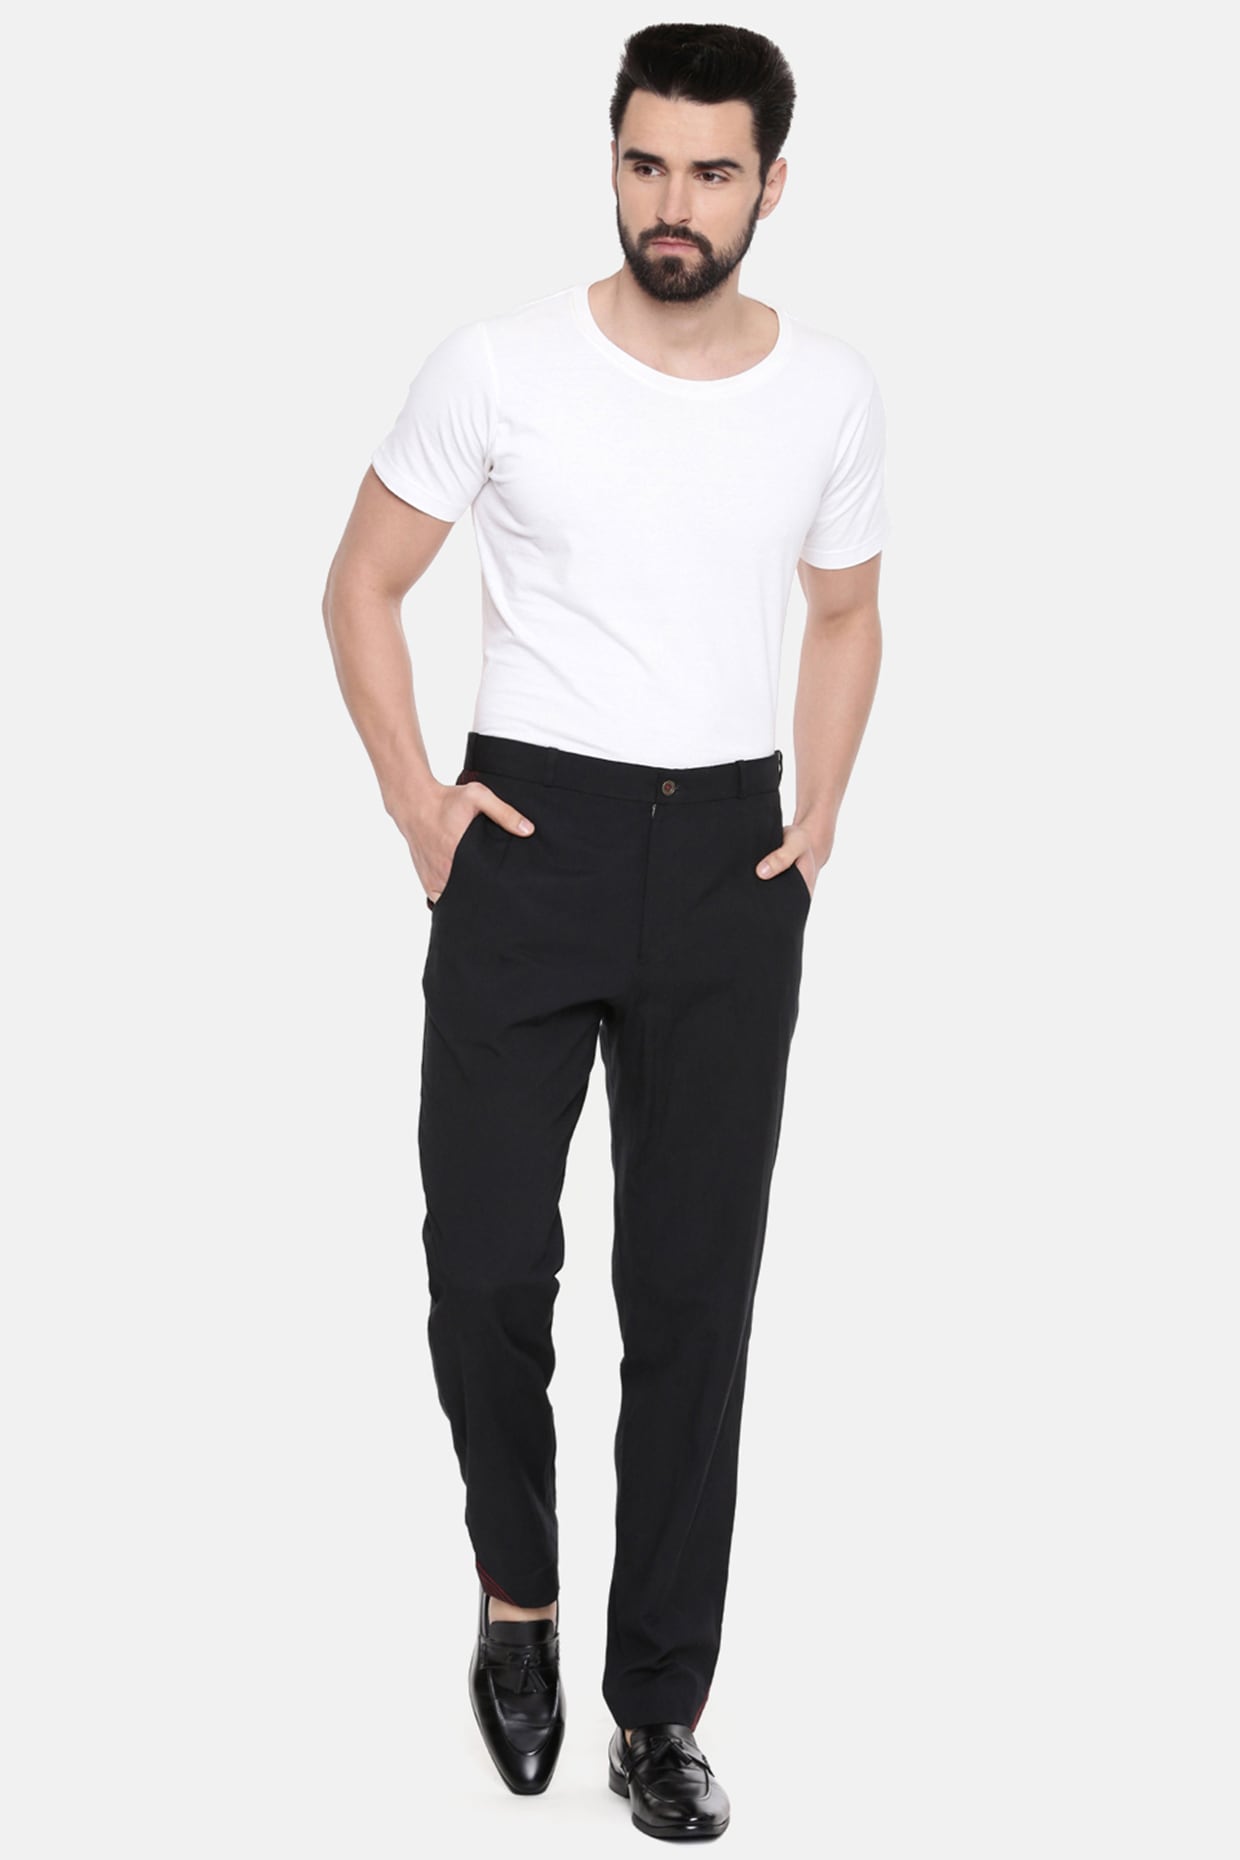 Buy Khaki Trousers & Pants for Men by INDEPENDENCE Online | Ajio.com